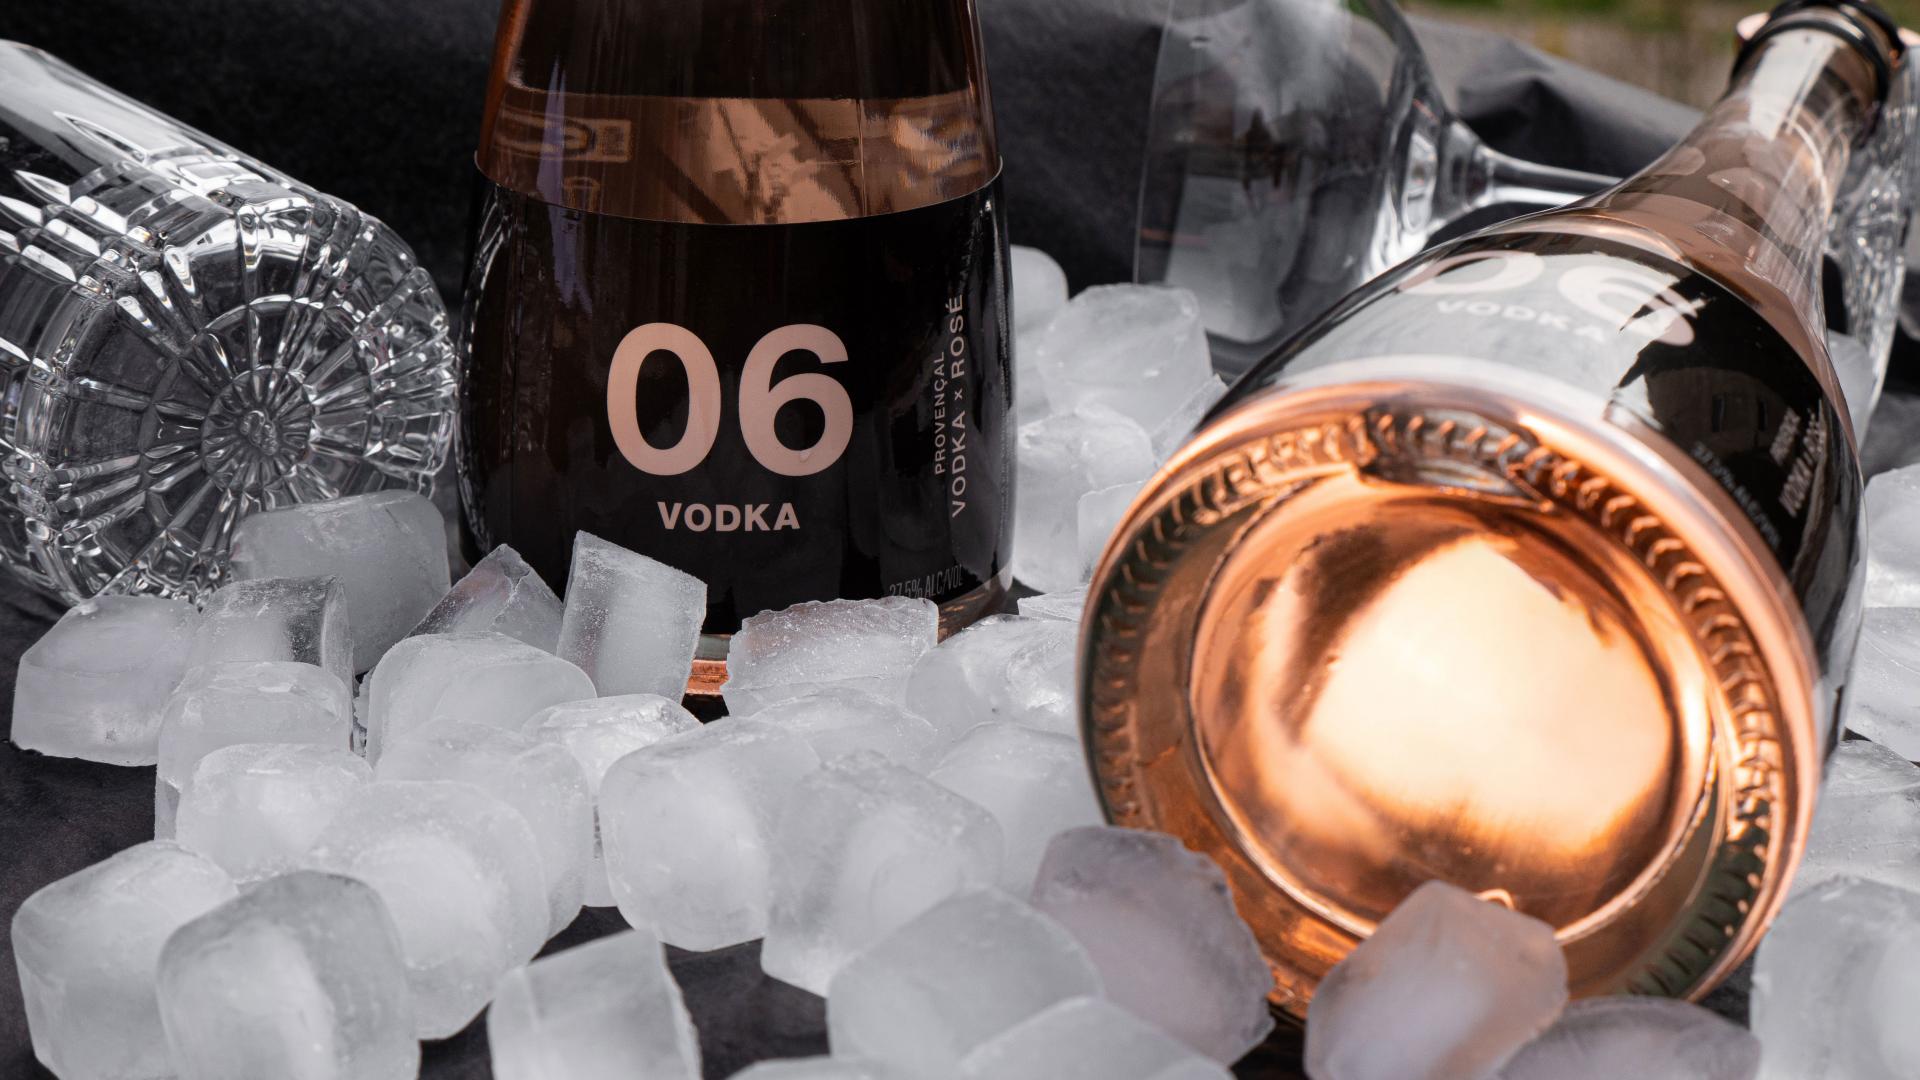 Christmas food and drink gifts 2021 | 06 vodka